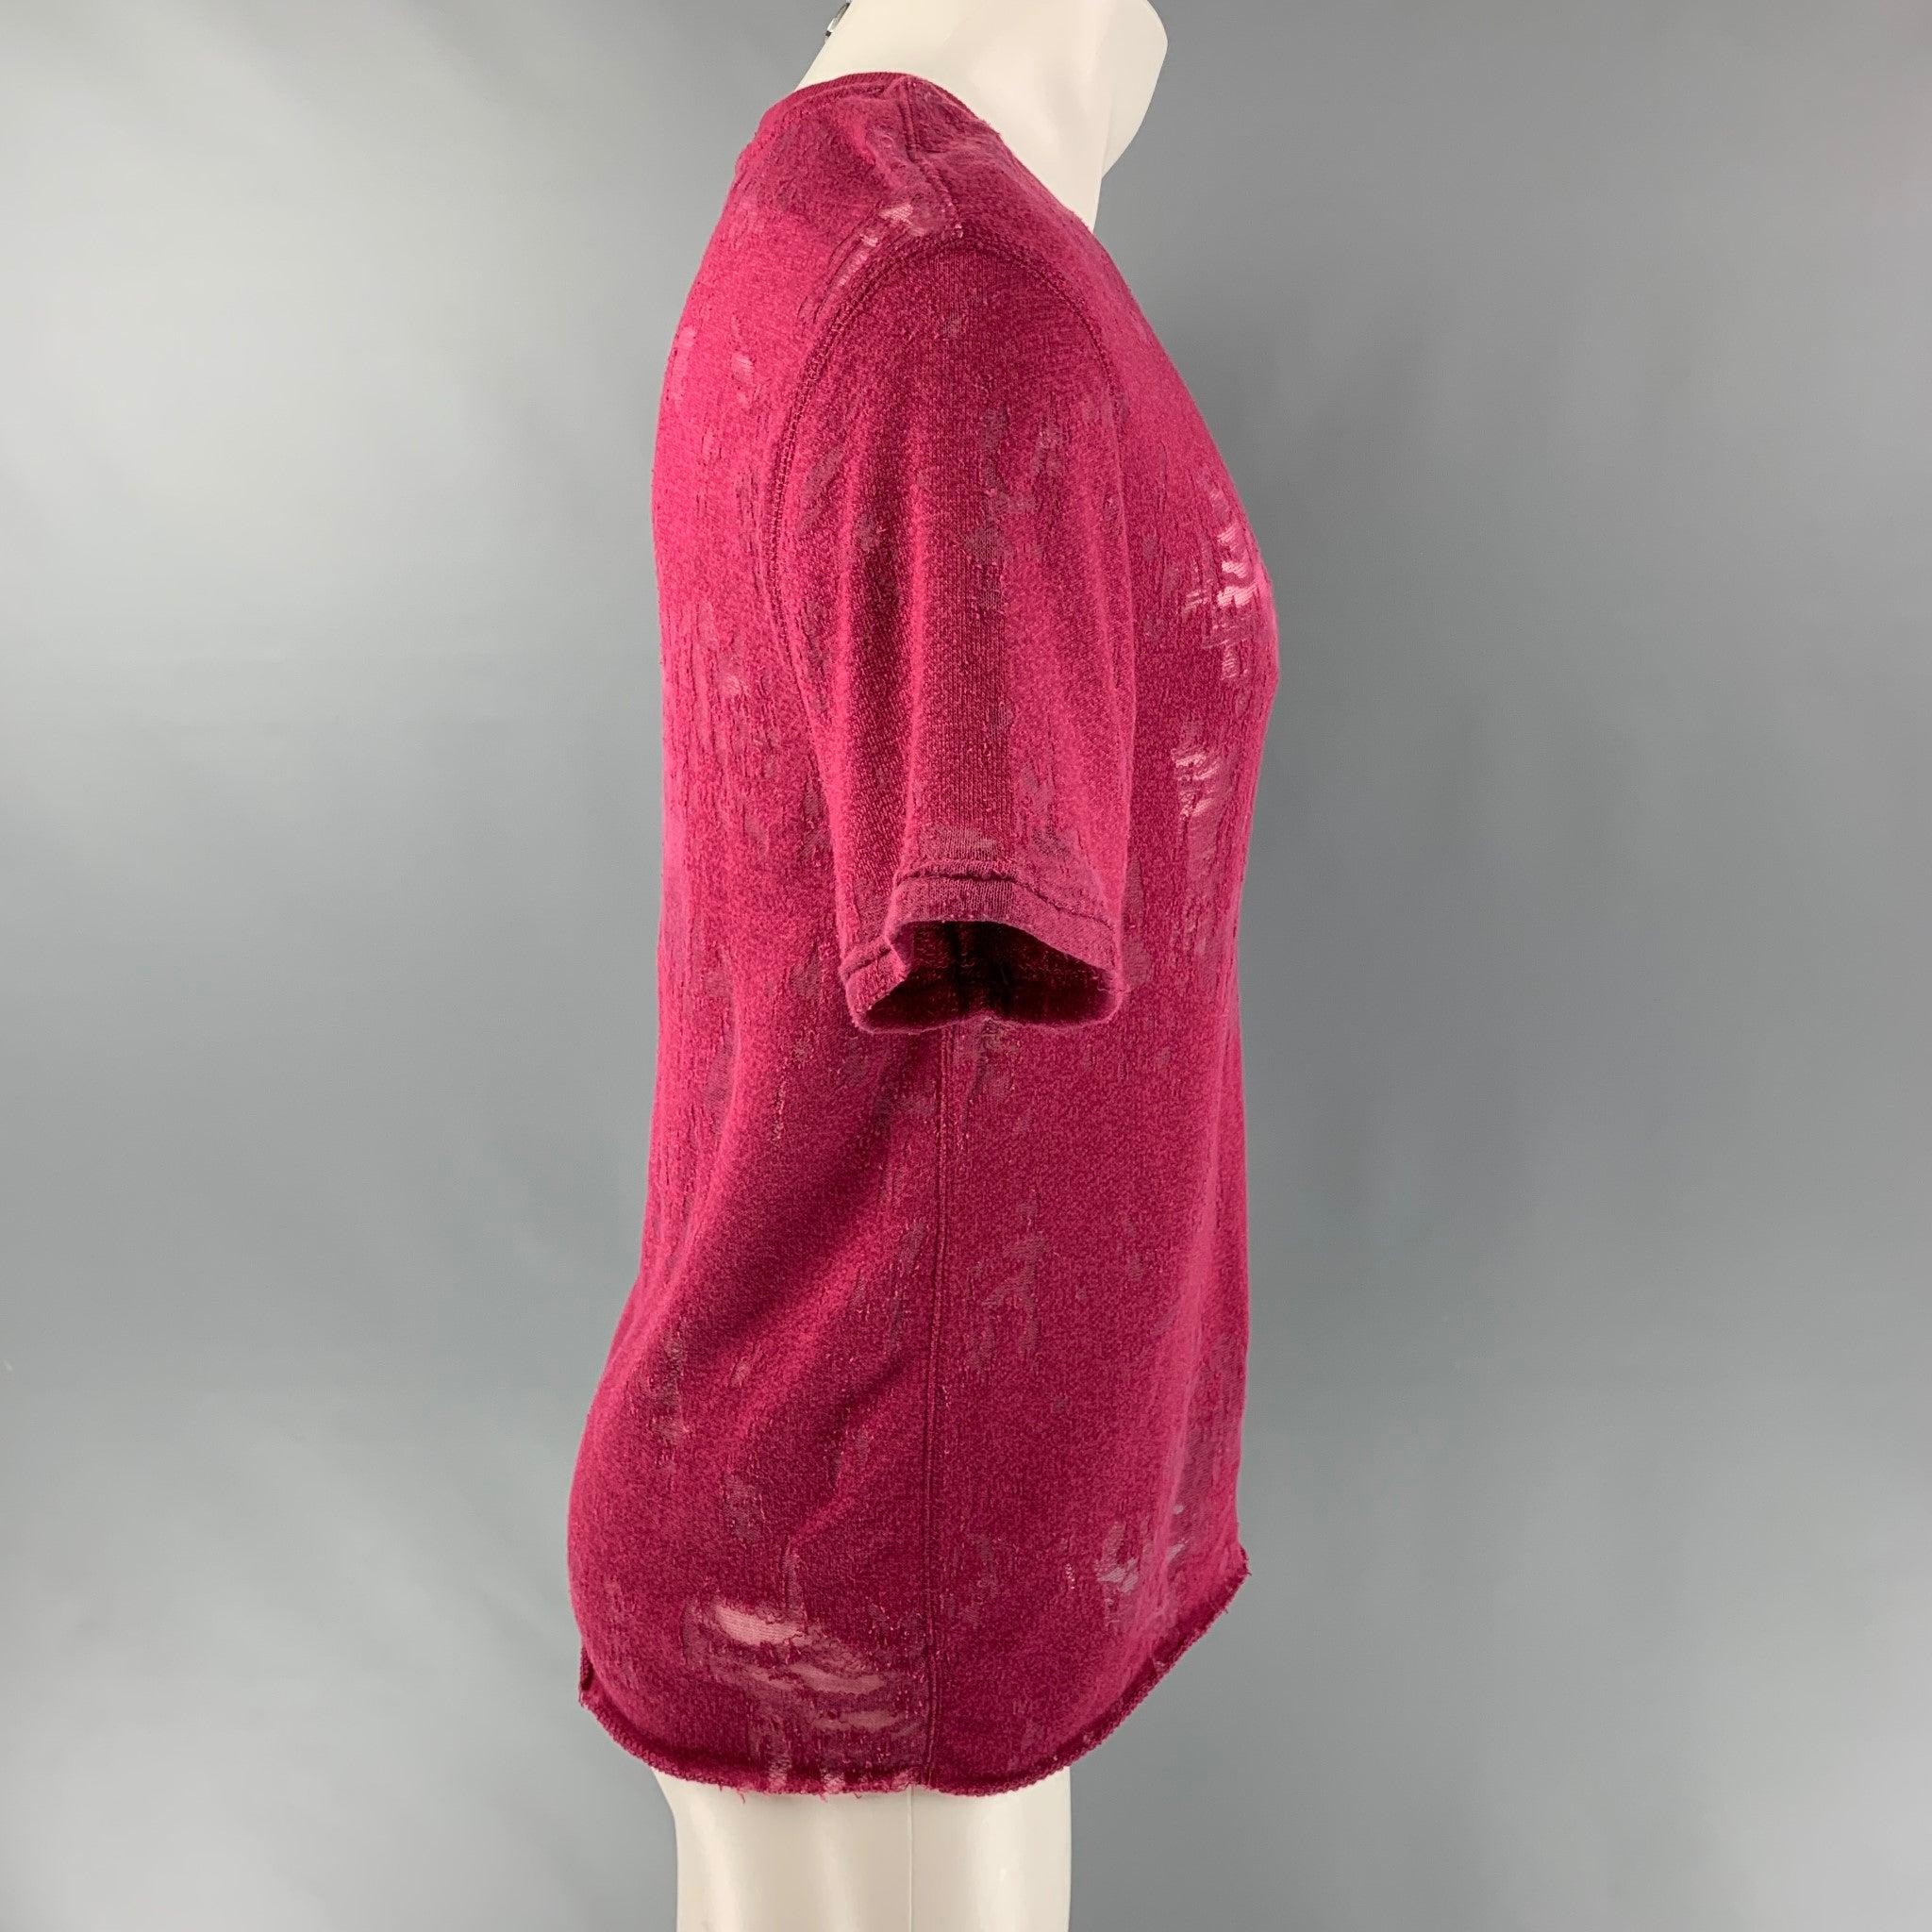 IRO JEANS Gaetane T-shirt comes in a burgundy partially see through cotton blend jersey featuring a distressed style and crew-neck. Excellent Pre-Owned Condition.  

Marked:   XS 

Measurements: 
 
Shoulder: 18.5 inches Sleeves: 9 inches Chest: 45